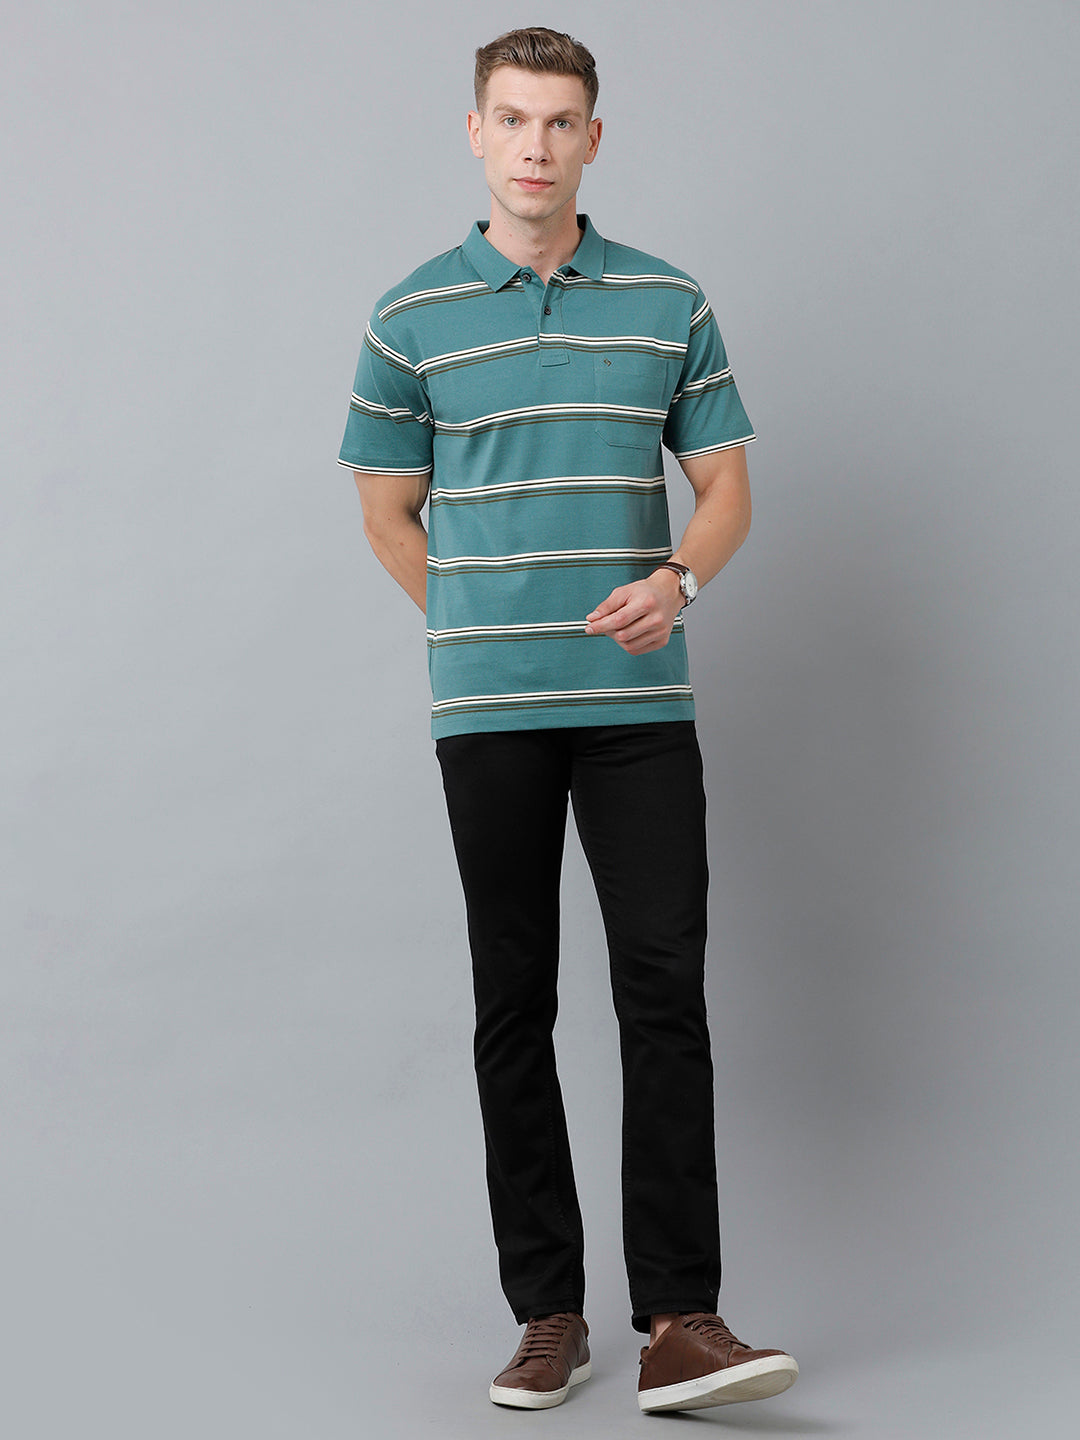 Classic Polo Men's Cotton Blend Half Sleeve Striped Authentic Fit Polo Neck Teal Grey Color T-Shirt | Avon - 527 A